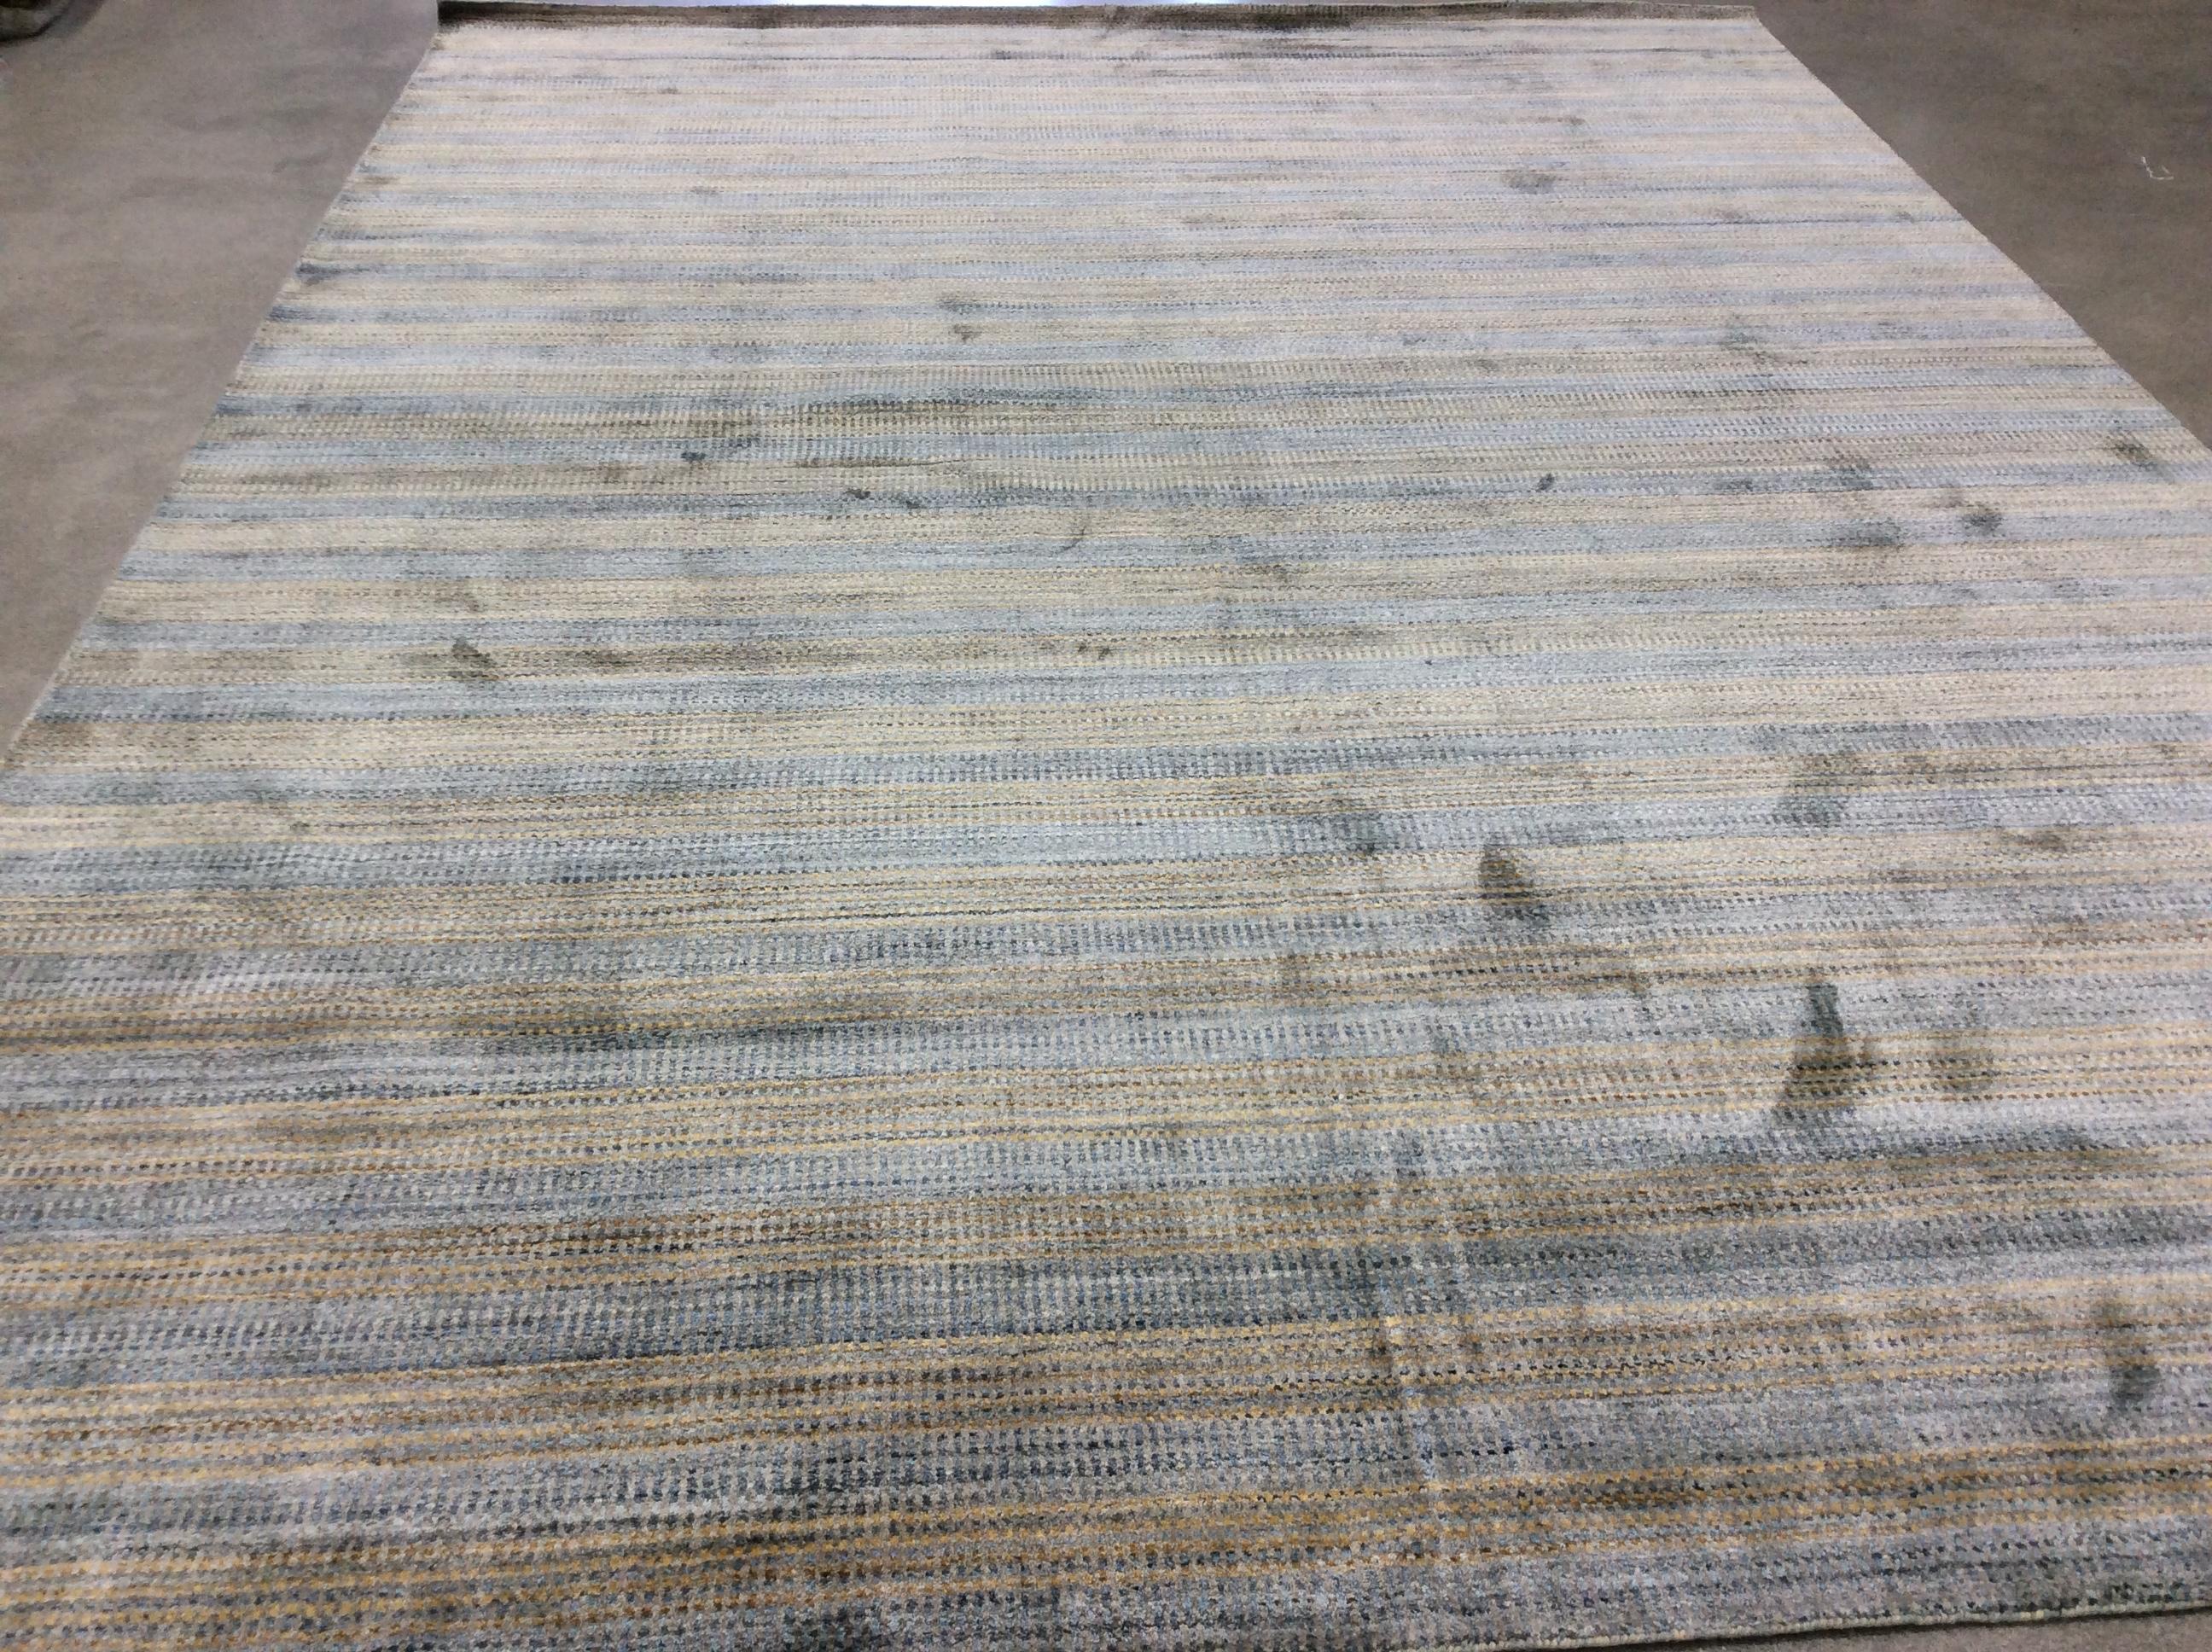 Zen collection rug in striated denim

Intricate pattern of dots and dash all over this silky feel rug. Neutral color palette with a touch of color, dress it up or down with this subtle rug.  Wool/viscose blend for comfort and durability.  Hand made